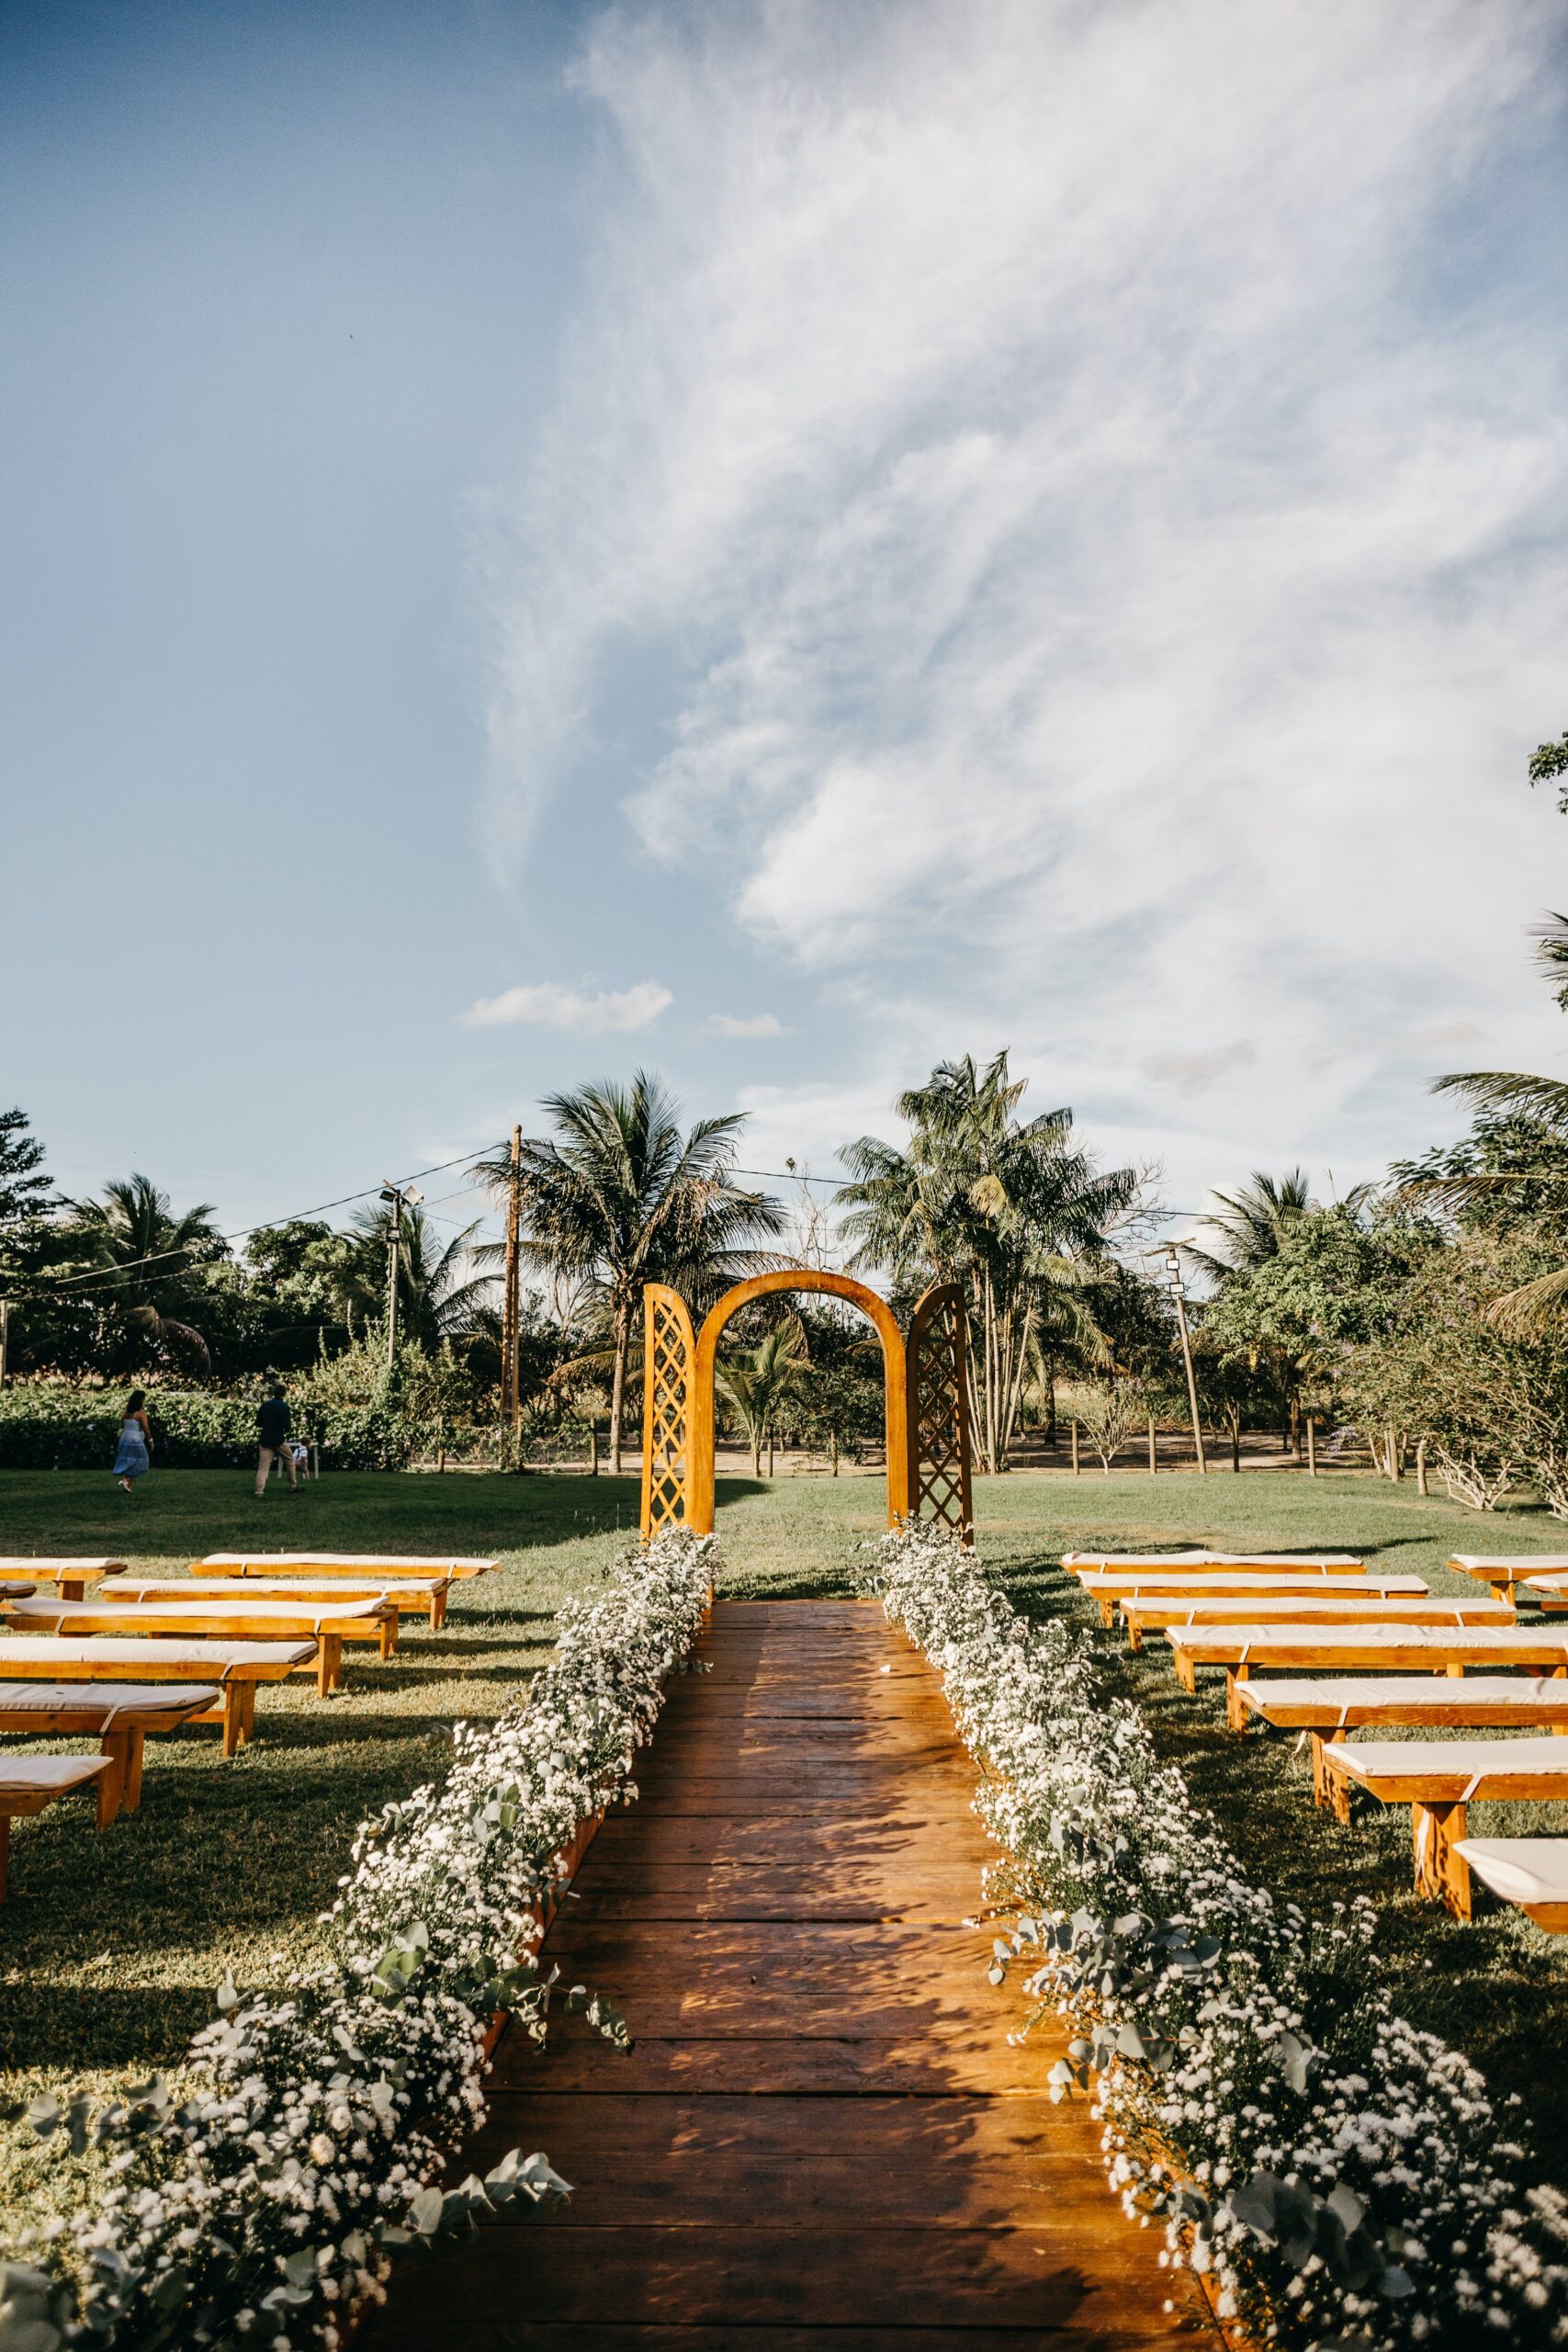 Africa is a great option for wedding venues due to its natural beauty. Airbnb’s provide less hassles for couples looking to have a destination wedding!